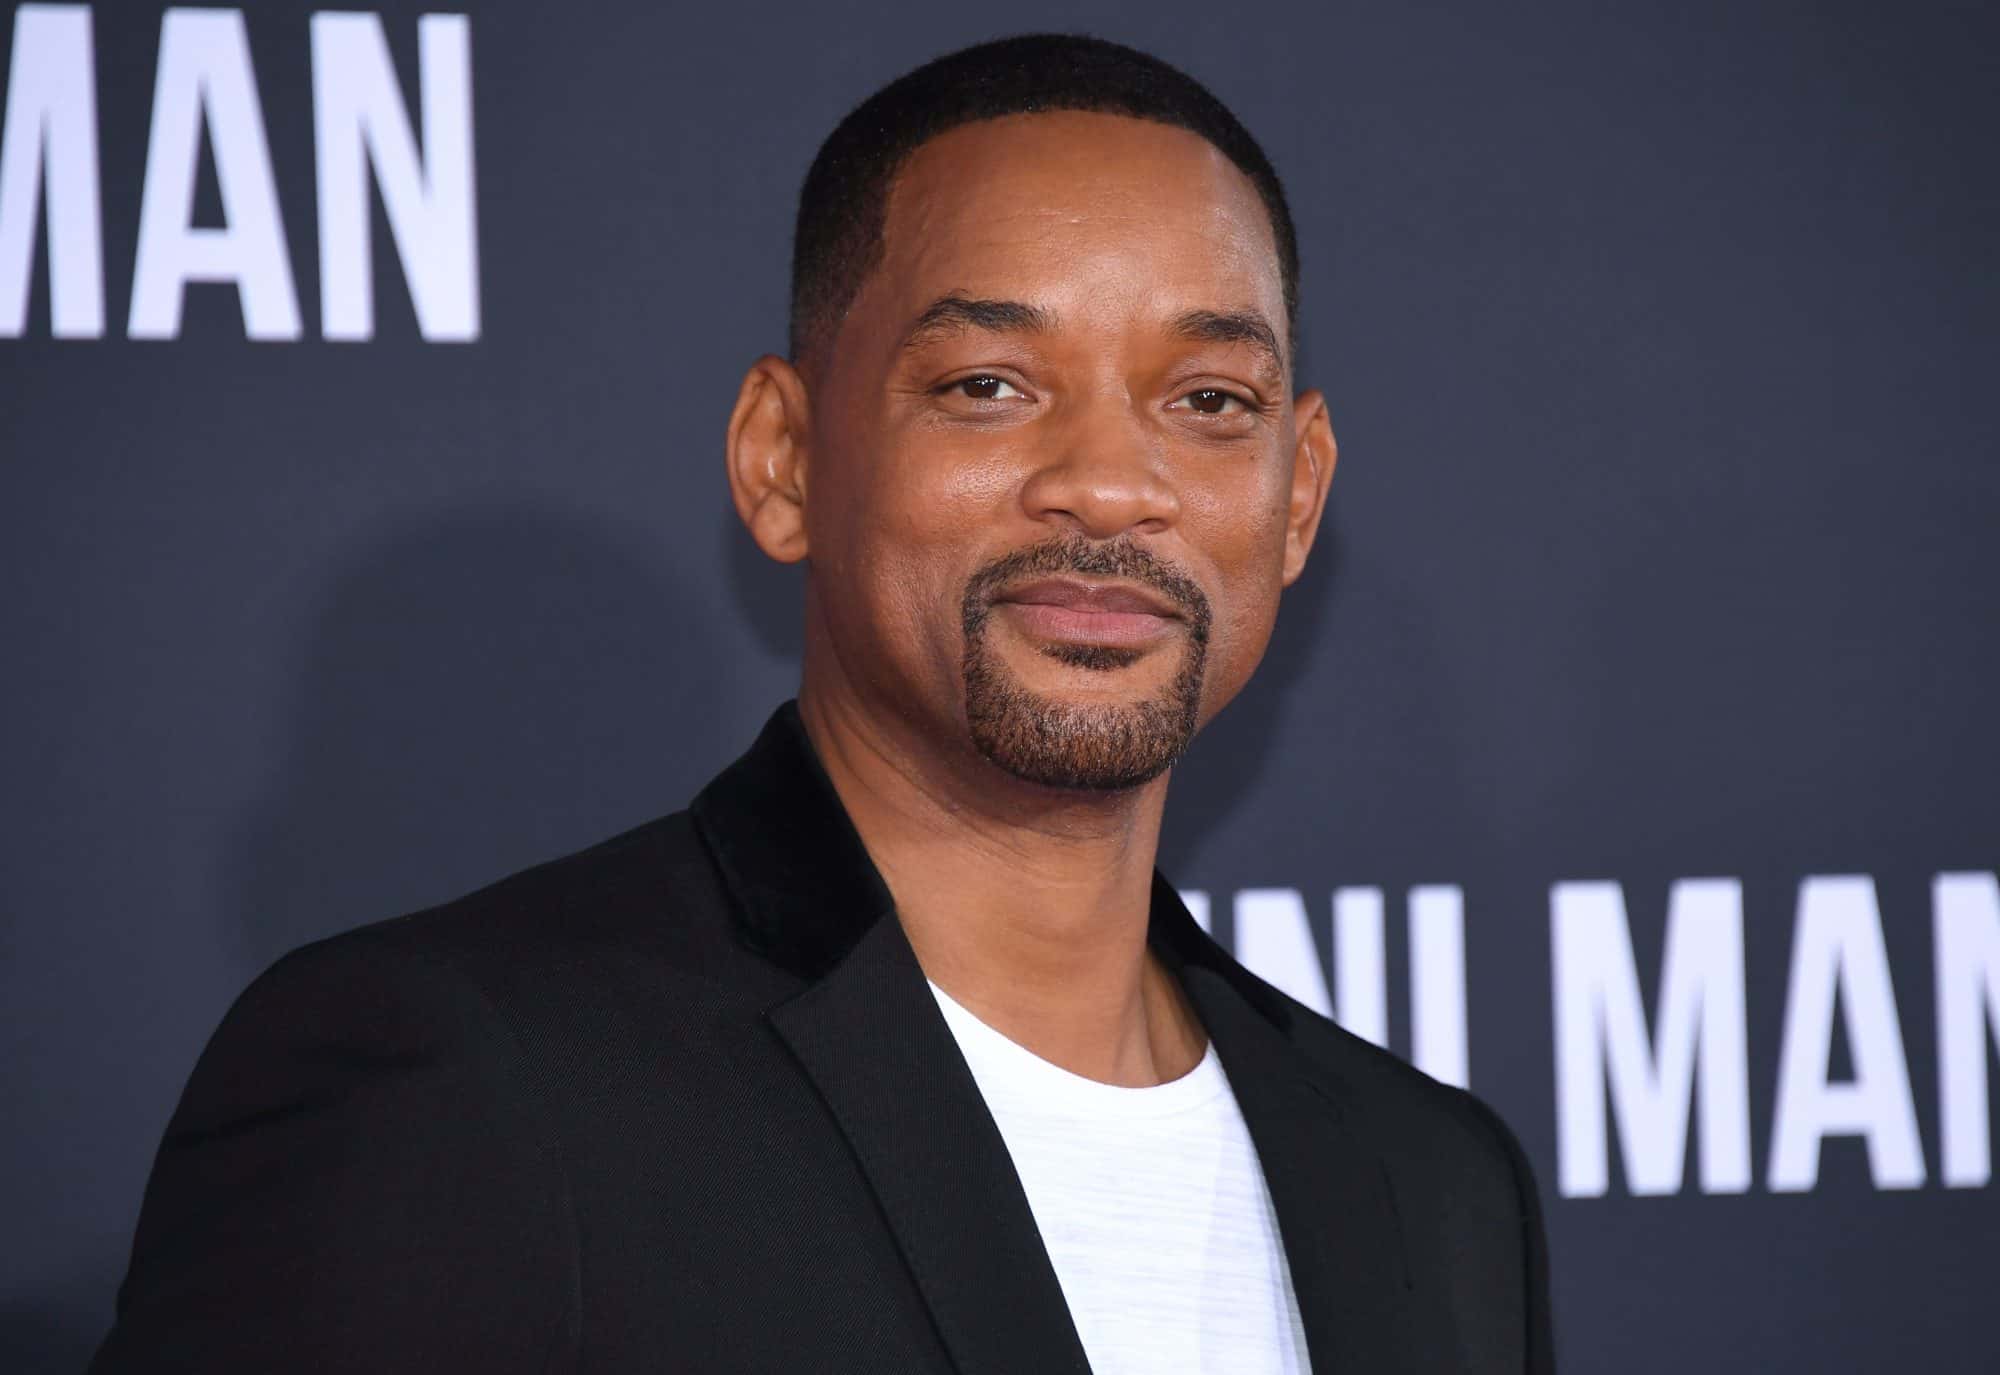 TrendMantra will-smith-2019-2000 31 Hottest Men Who Always Rule The Hearts & Search Results Of Women 